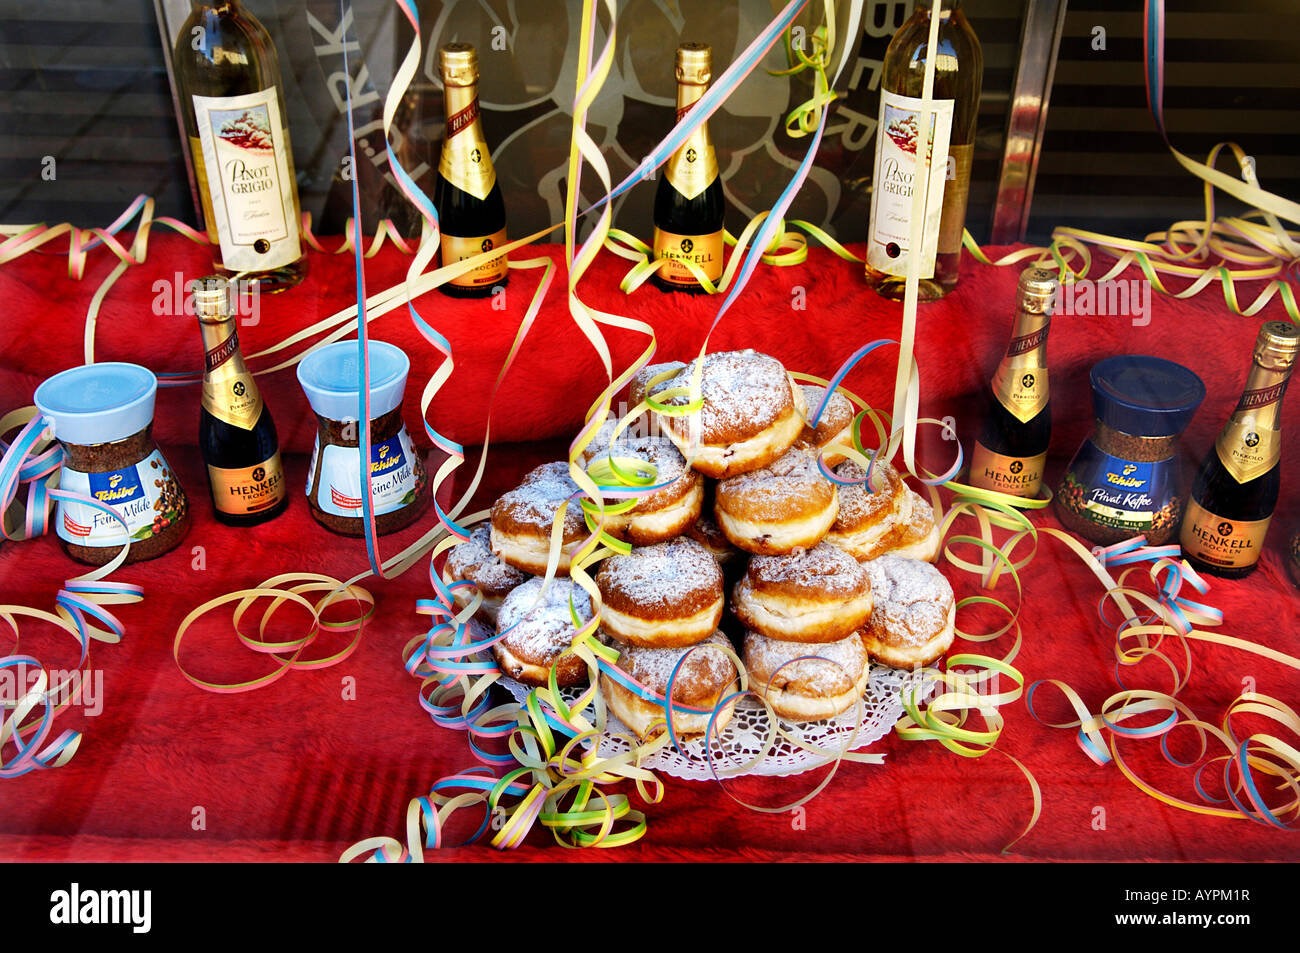 Jelly donuts, baked goods on display at a bakery, Maxvorstadt district, Munich, Bavaria, Germany Stock Photo